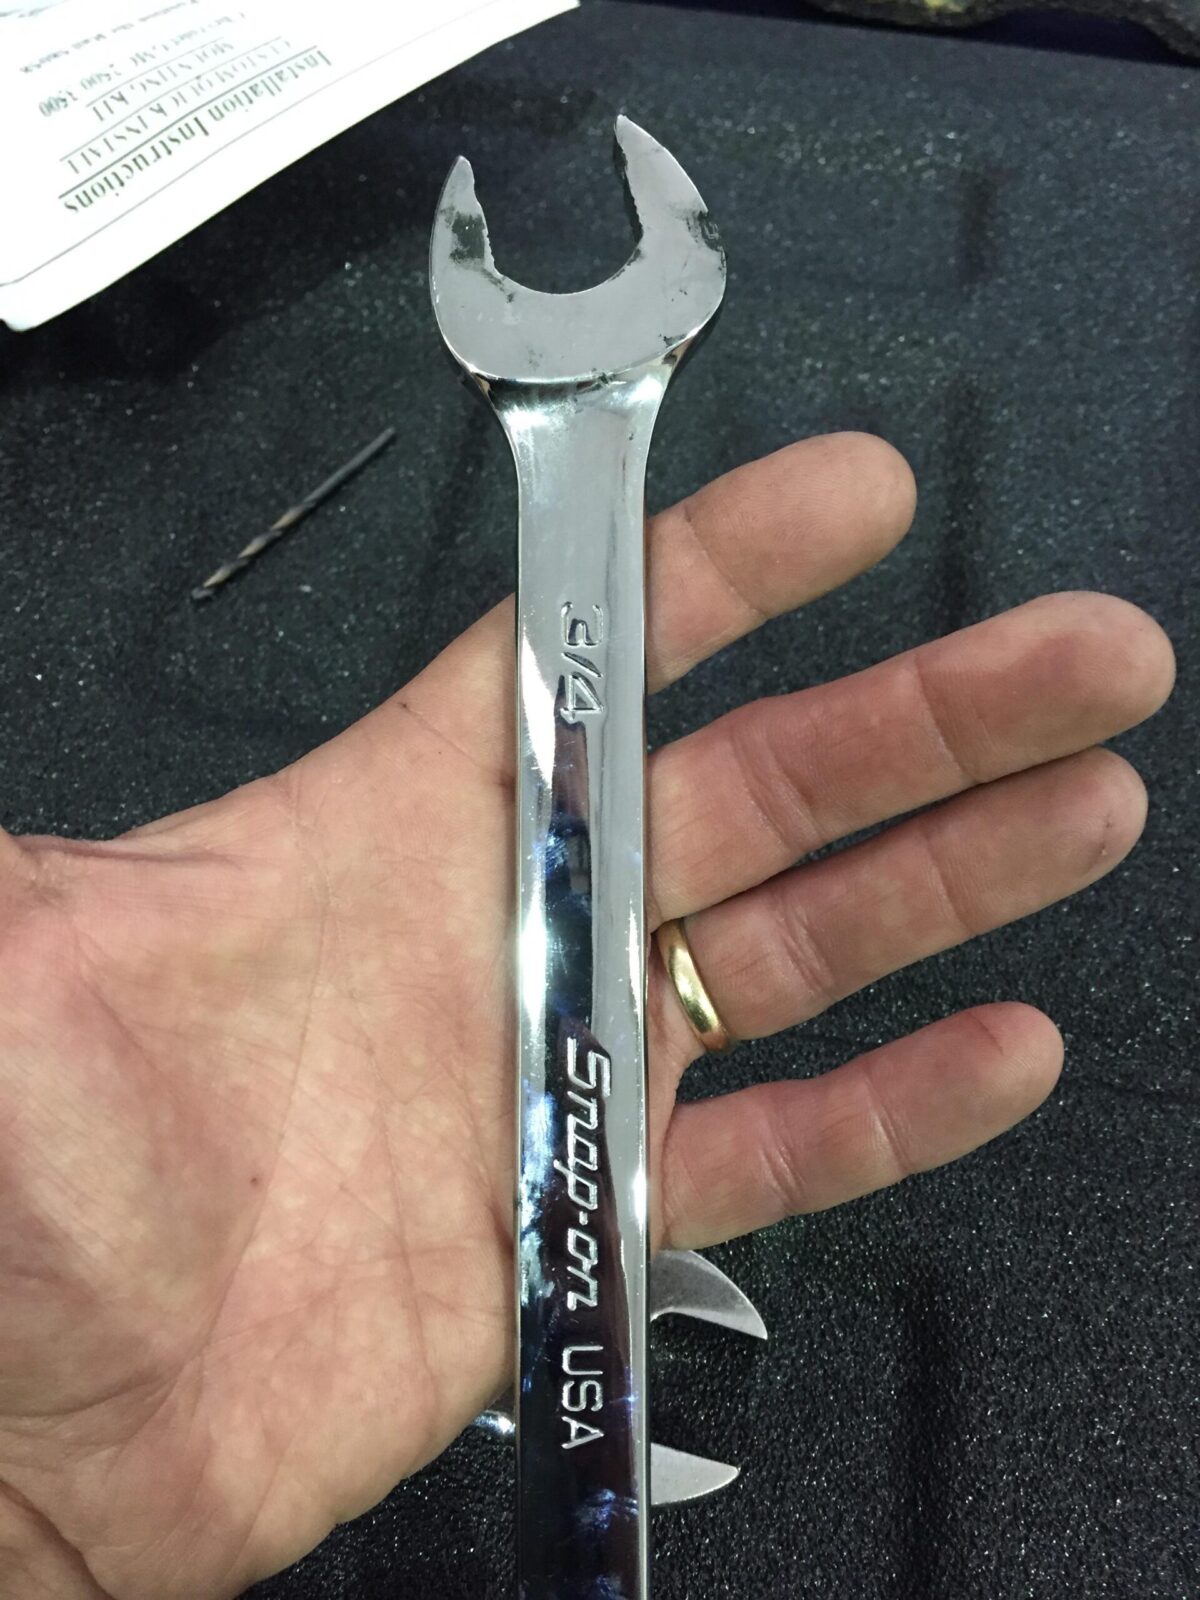 Who Makes the Best Wrenches in the World?